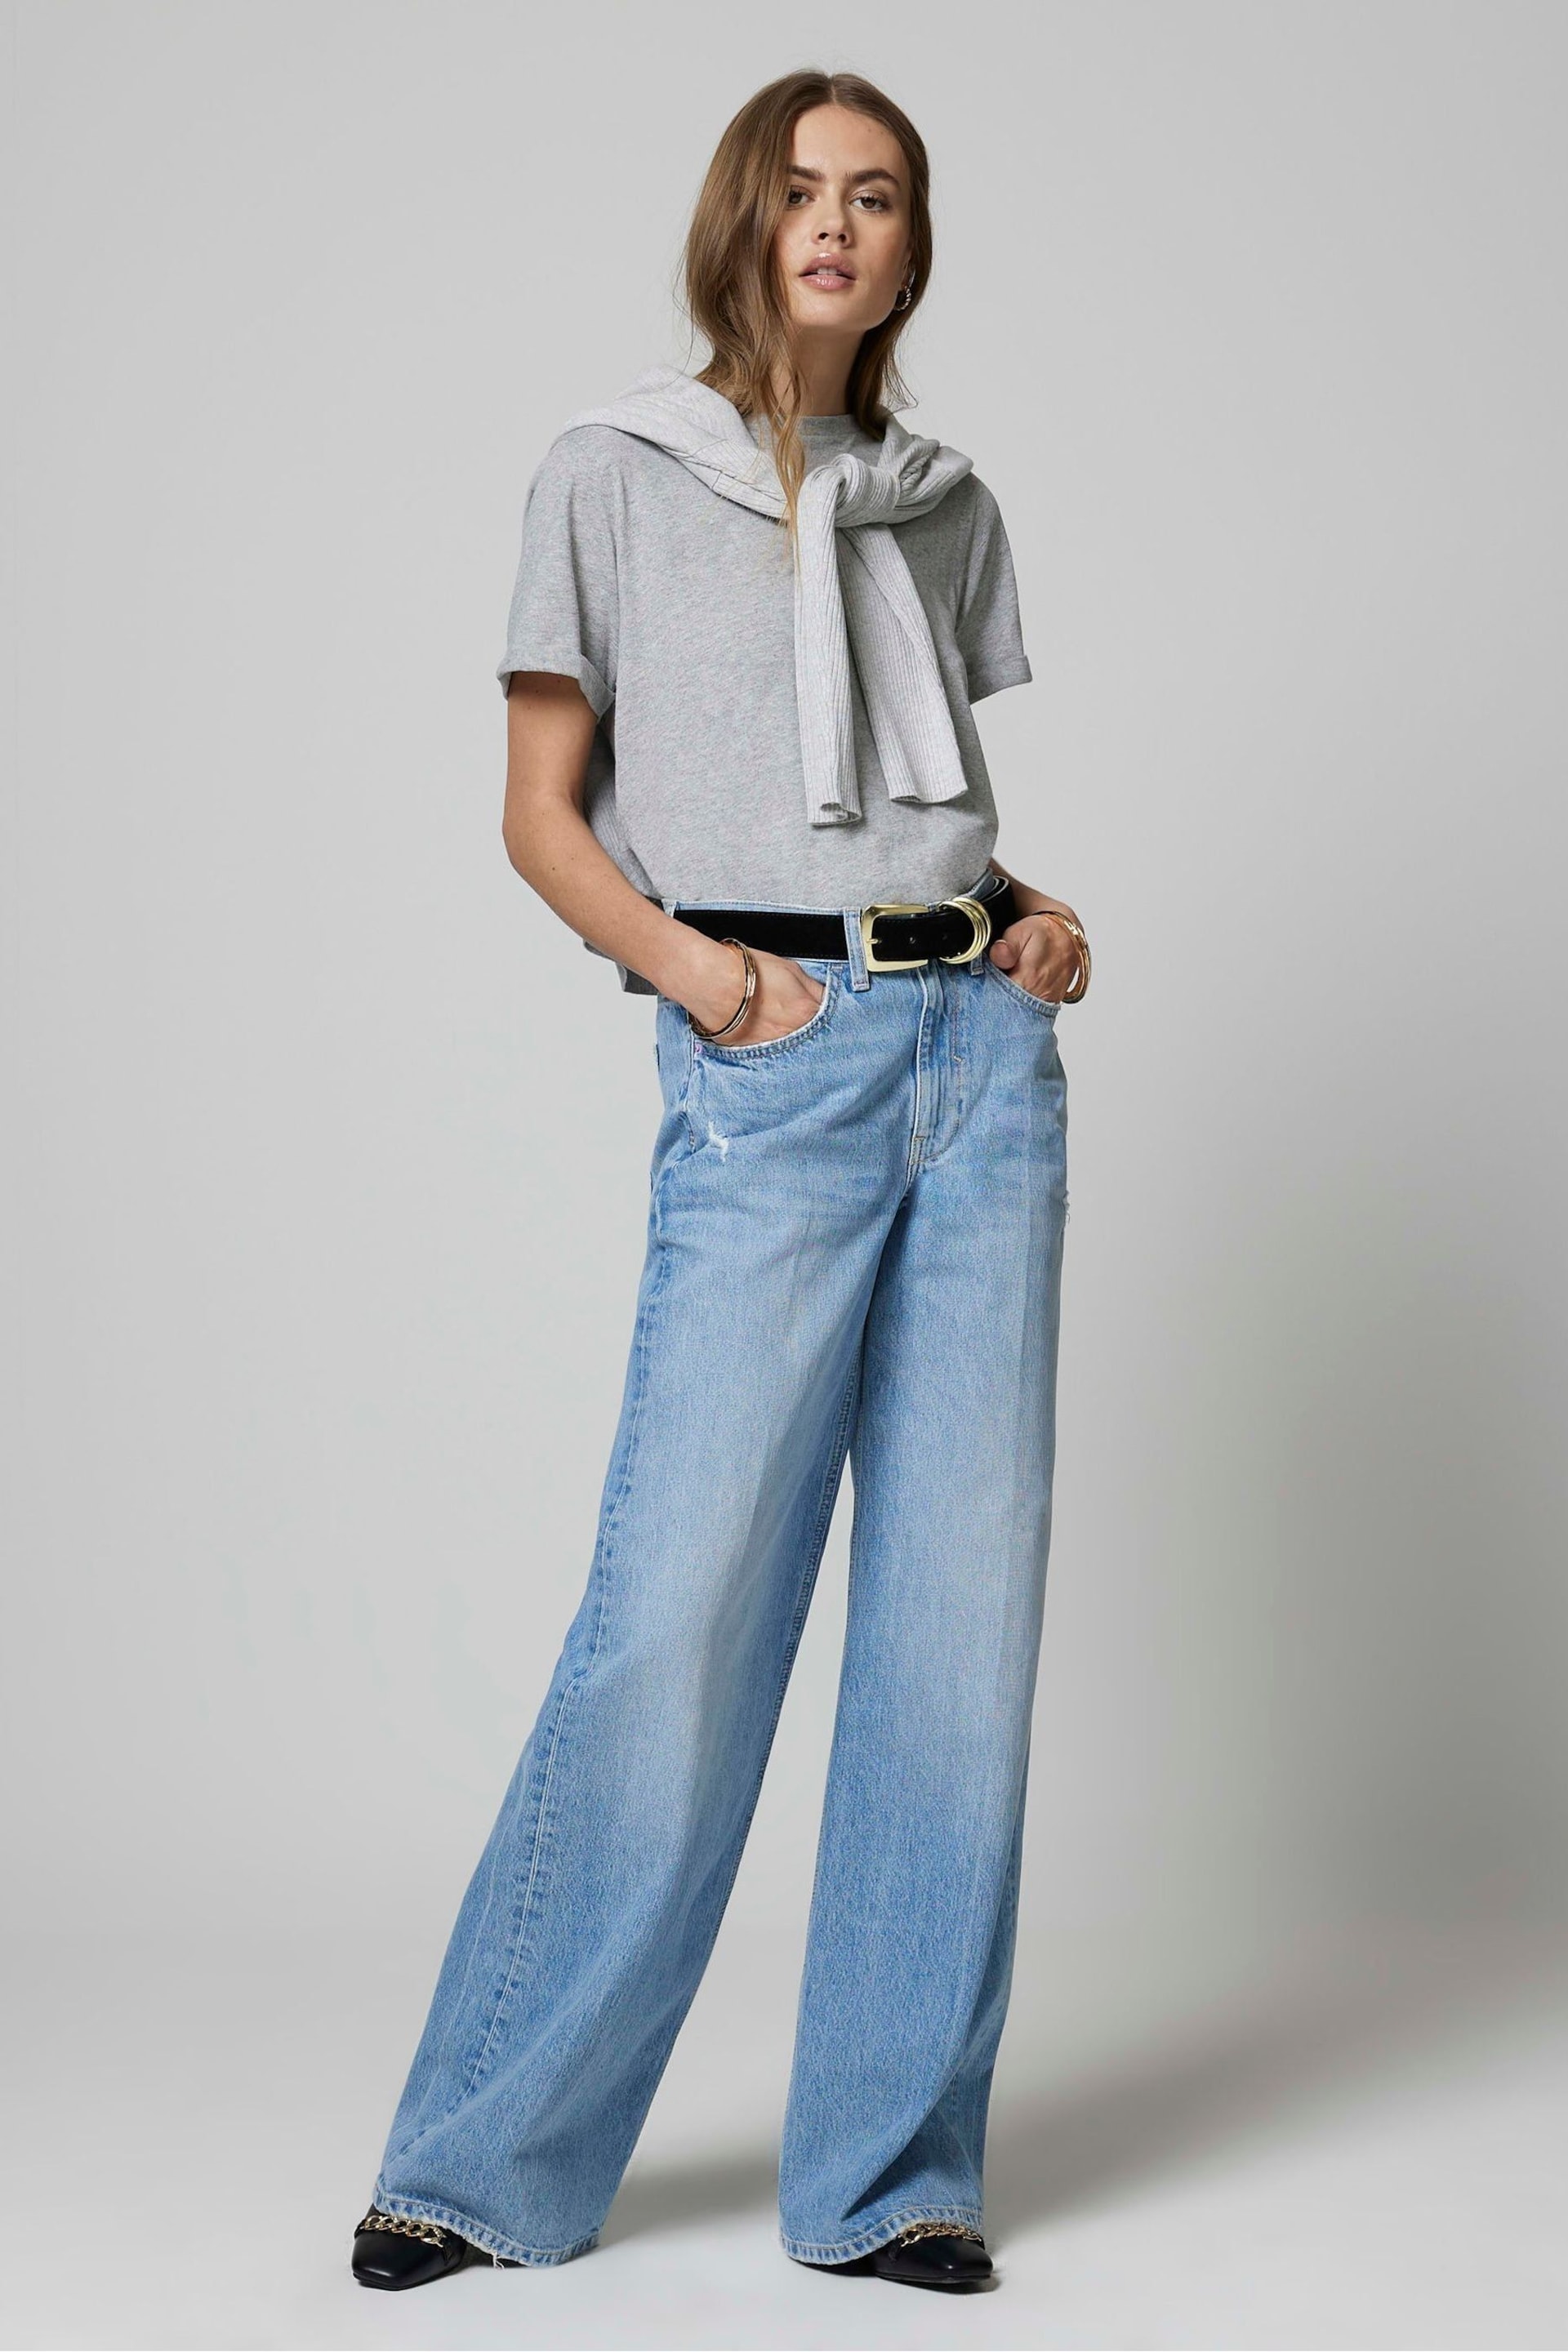 River Island Blue High Rise Wide Leg Baggy Jeans - Image 1 of 6